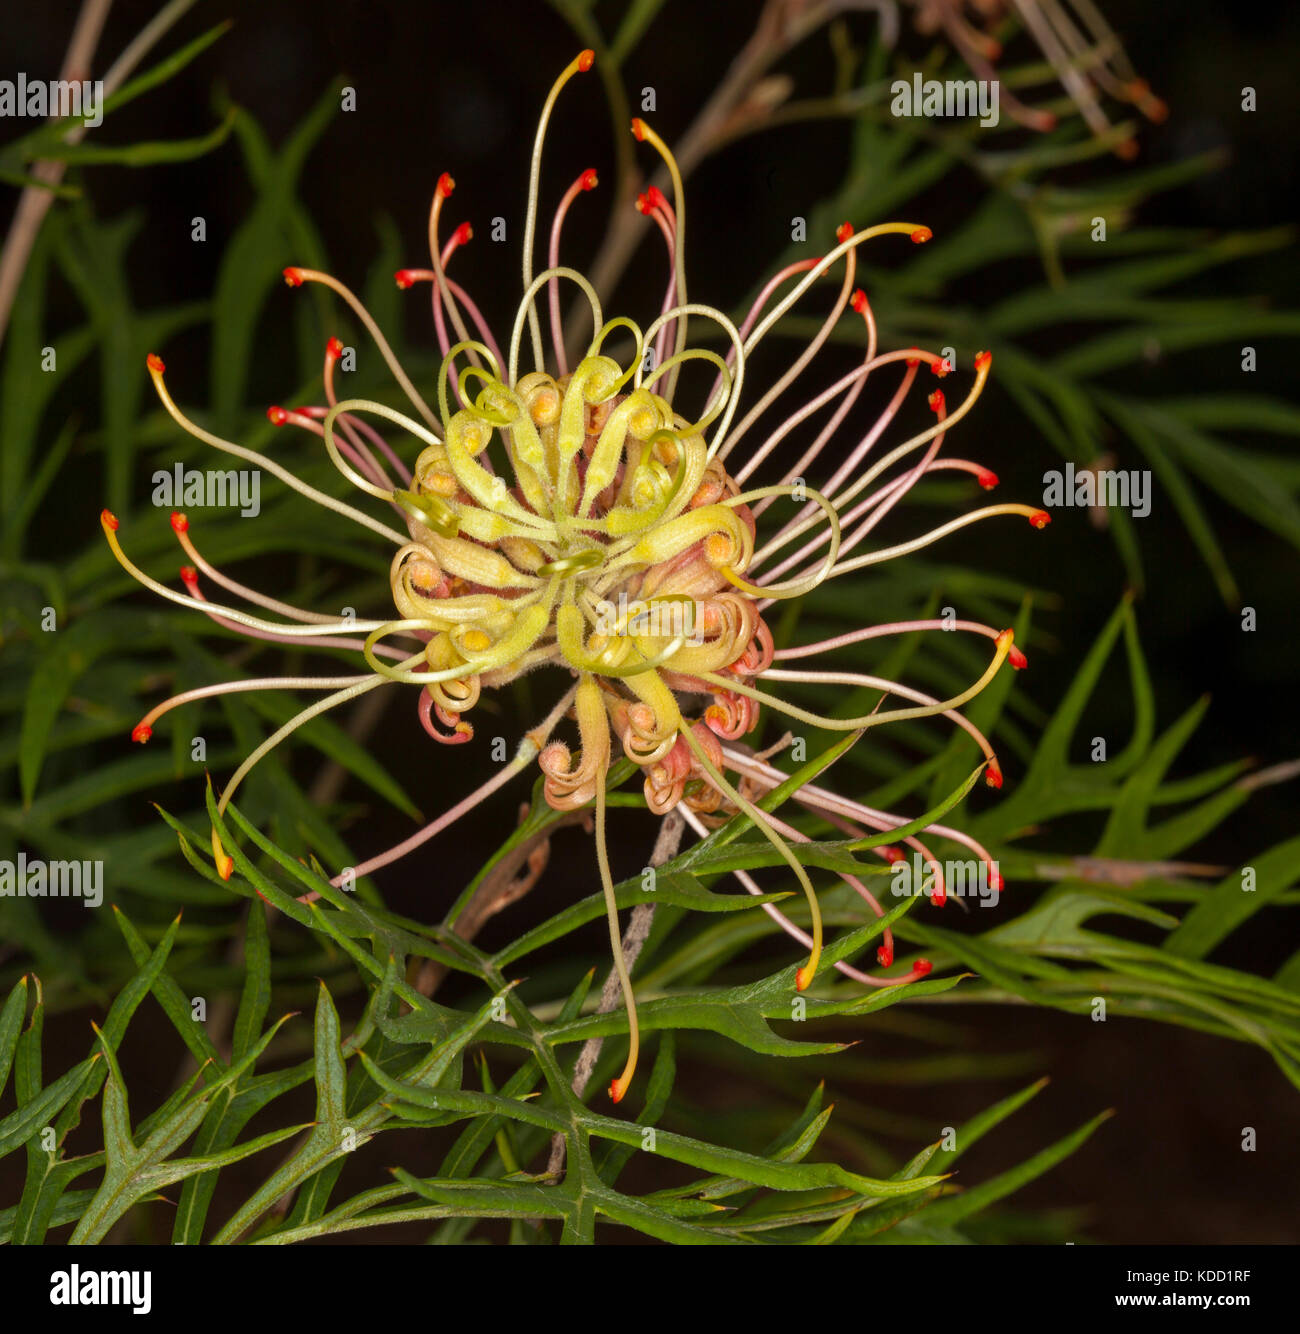 Pink and cream flower of Grevillea 'Peaches and Cream', and Australian native plant, with bright red stamens against background of green foliage Stock Photo